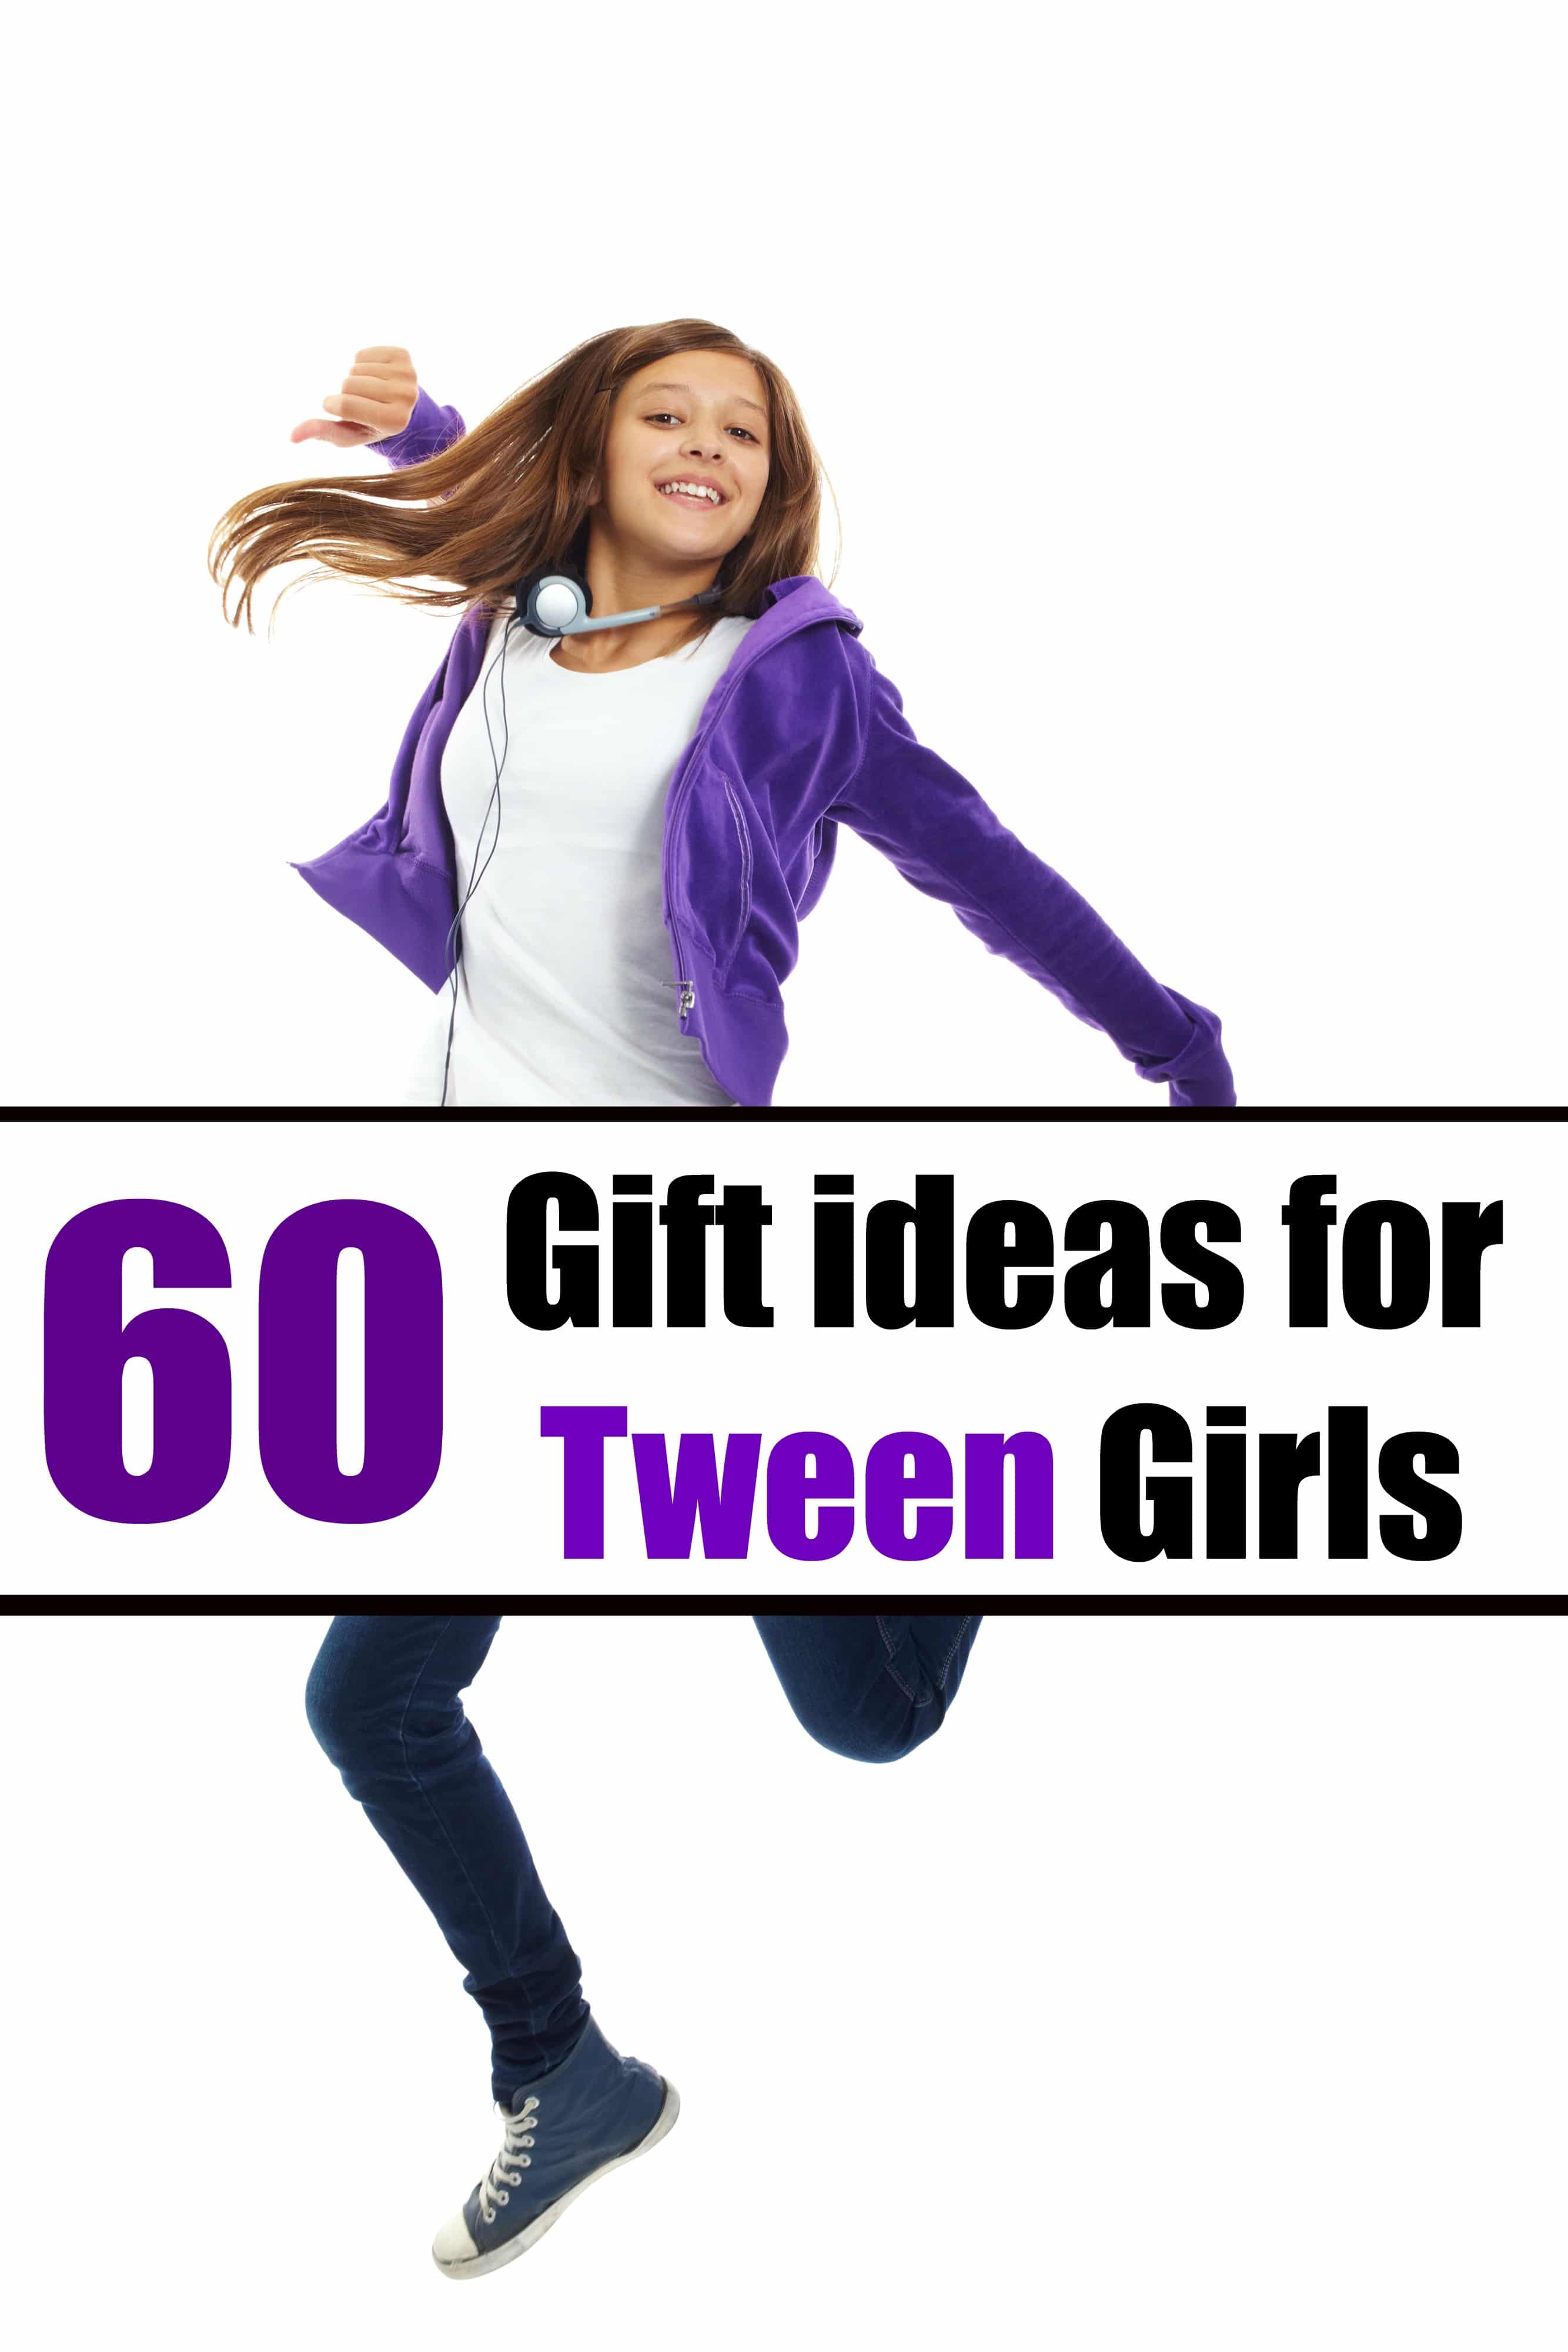 Gift Ideas for Tween Girls - Over 60 gift ideas to make shopping for your tween a snap